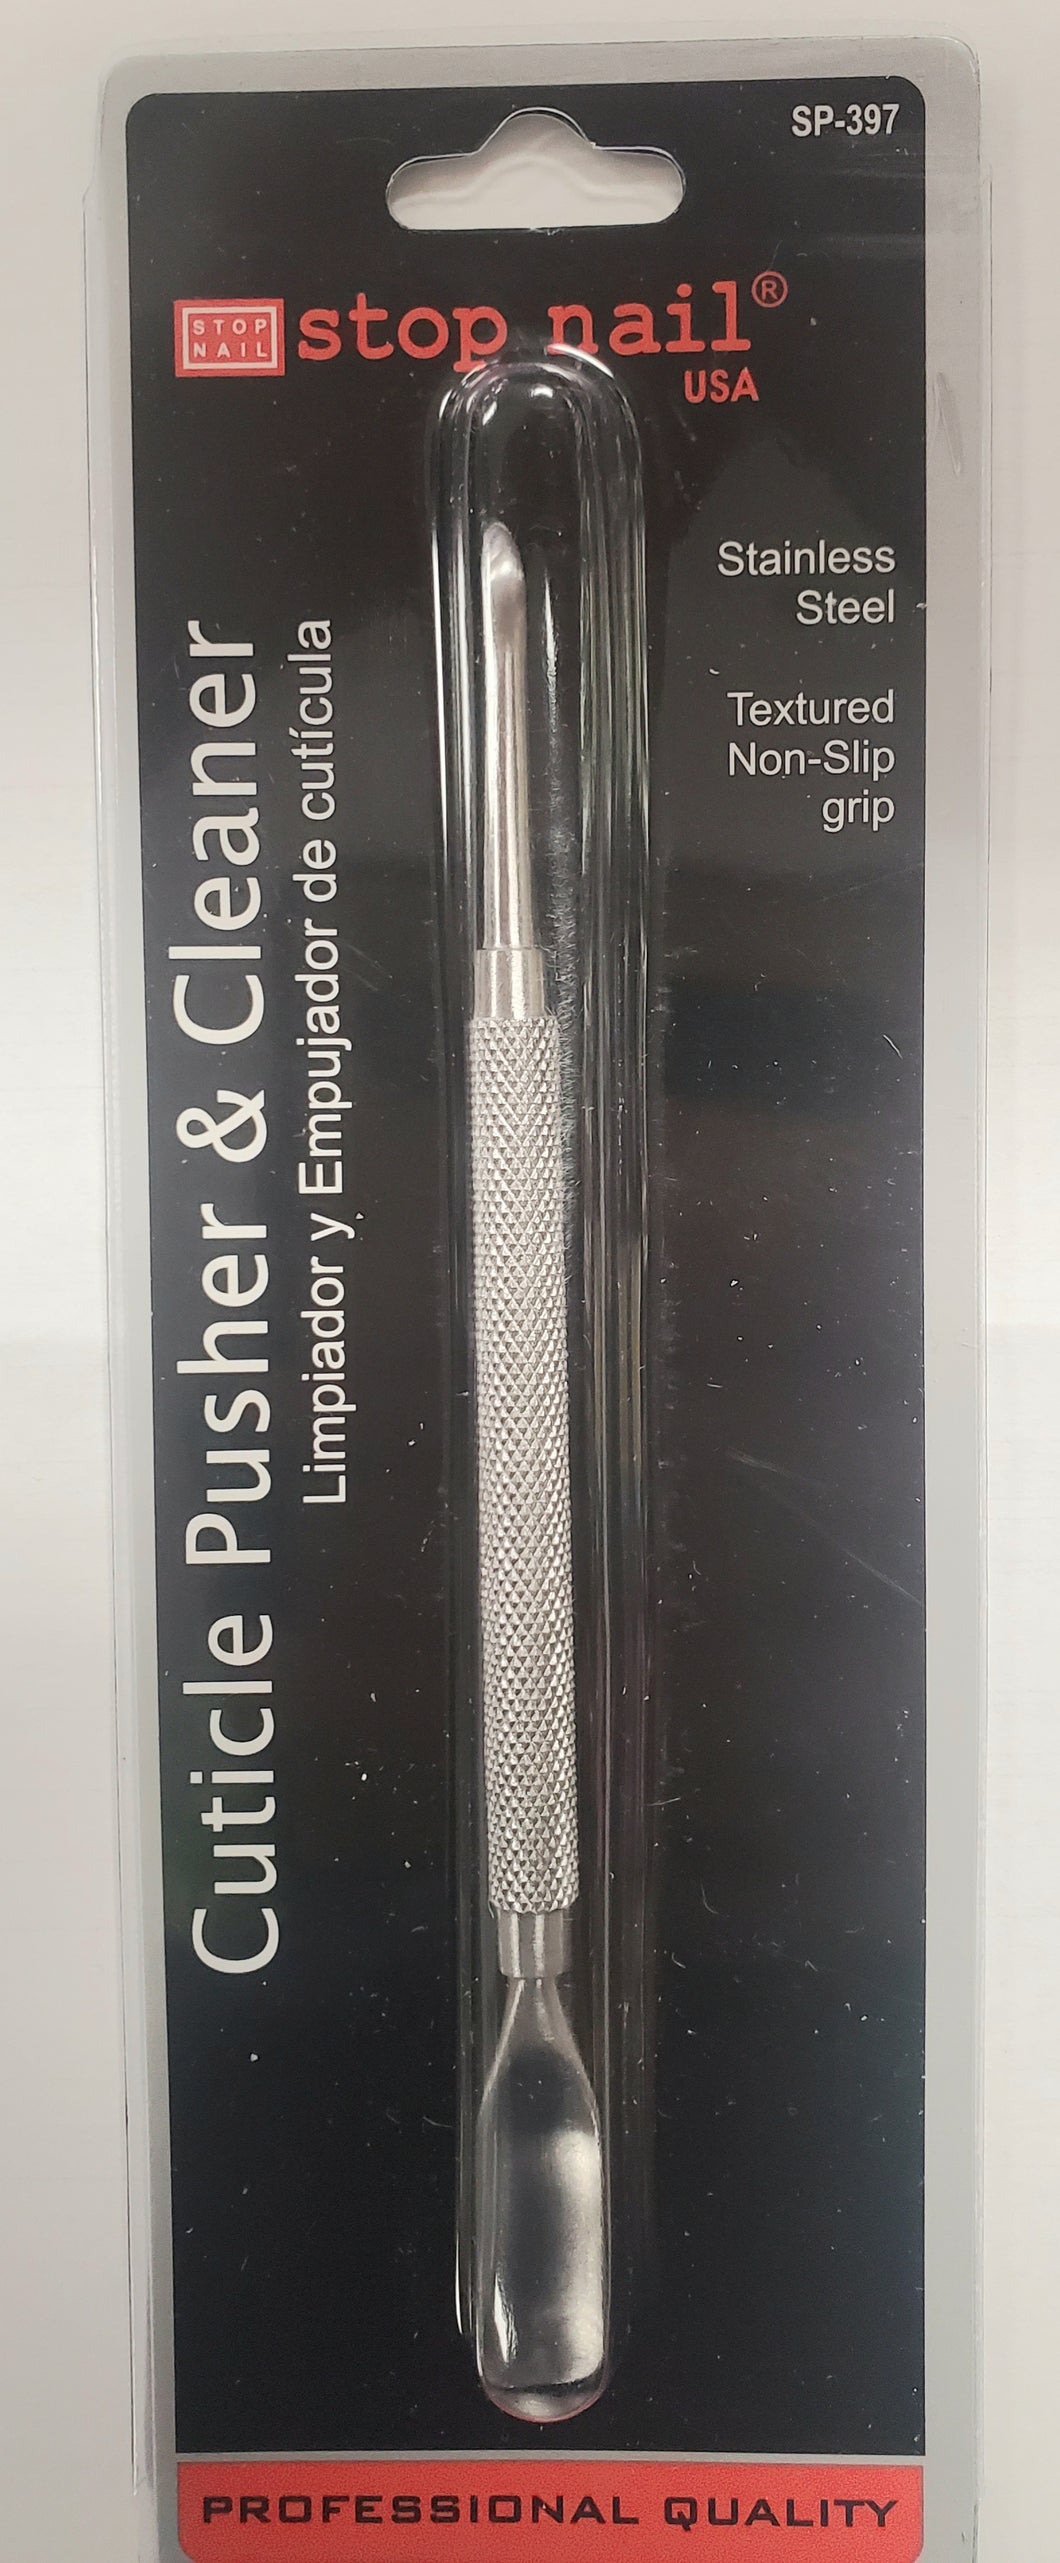 Stop Nail cuticle pusher and cleaner